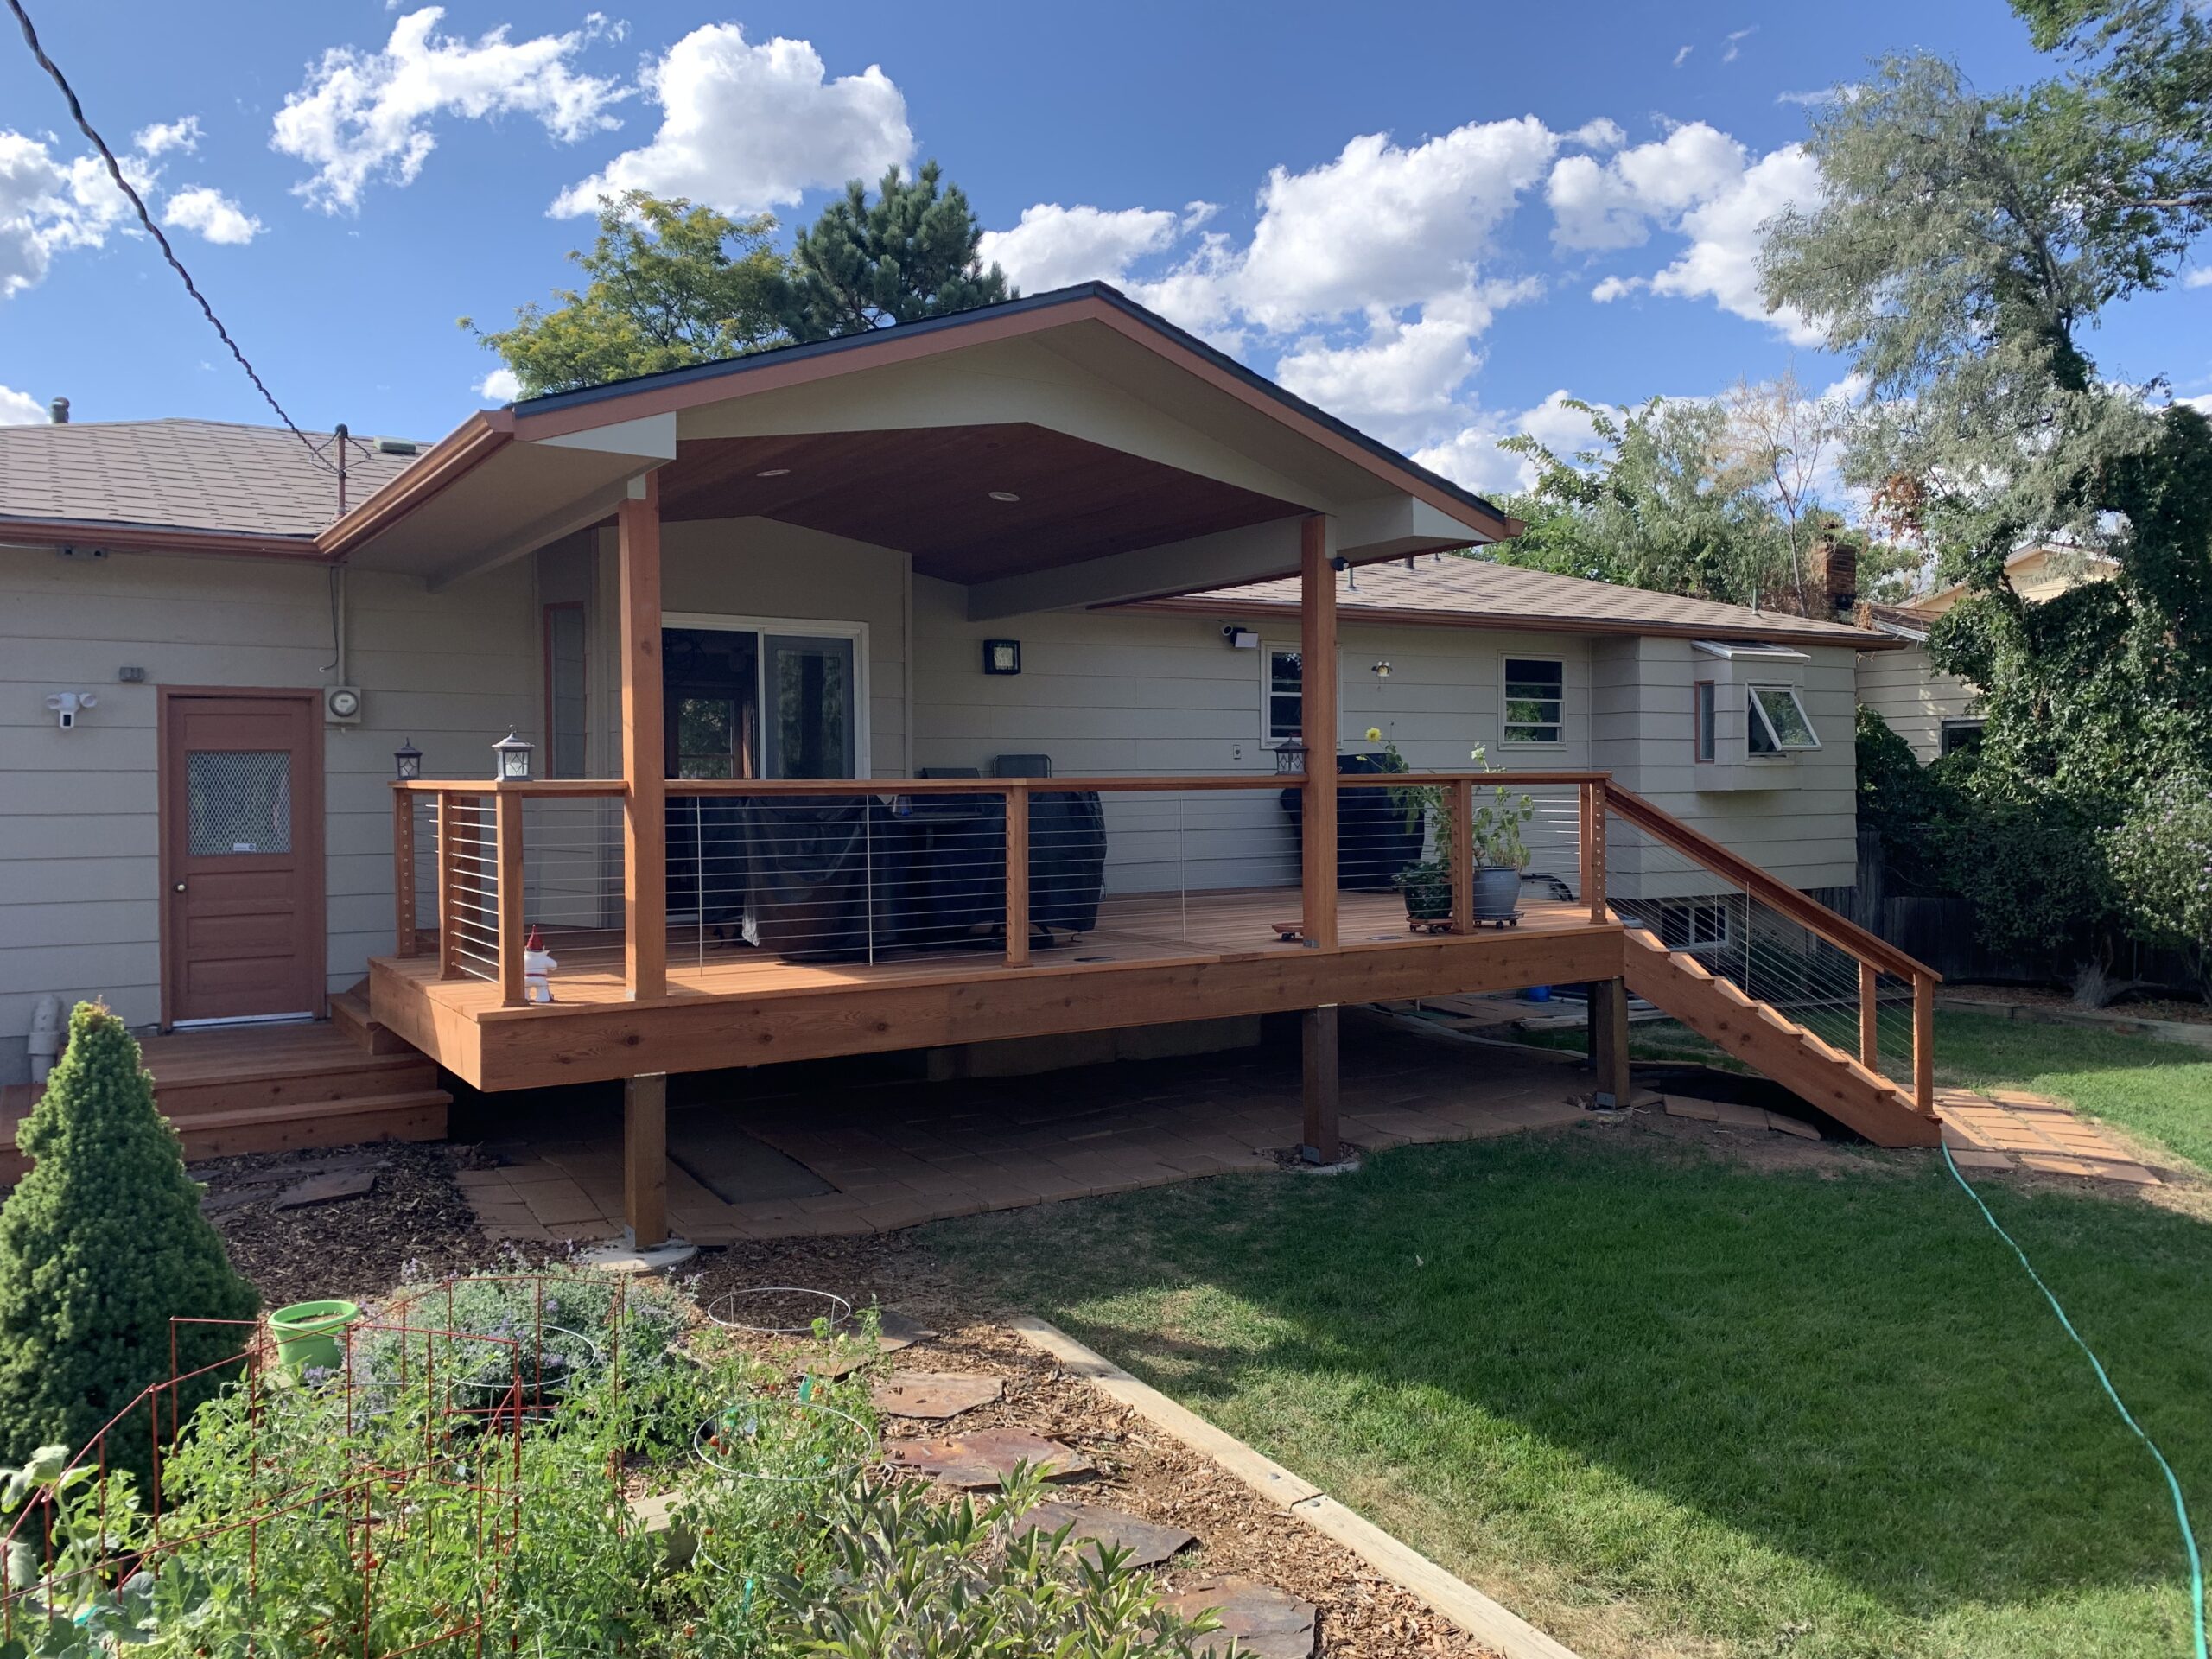 B-Grade Redwood deck with a gabled deck cover and custom designed railing